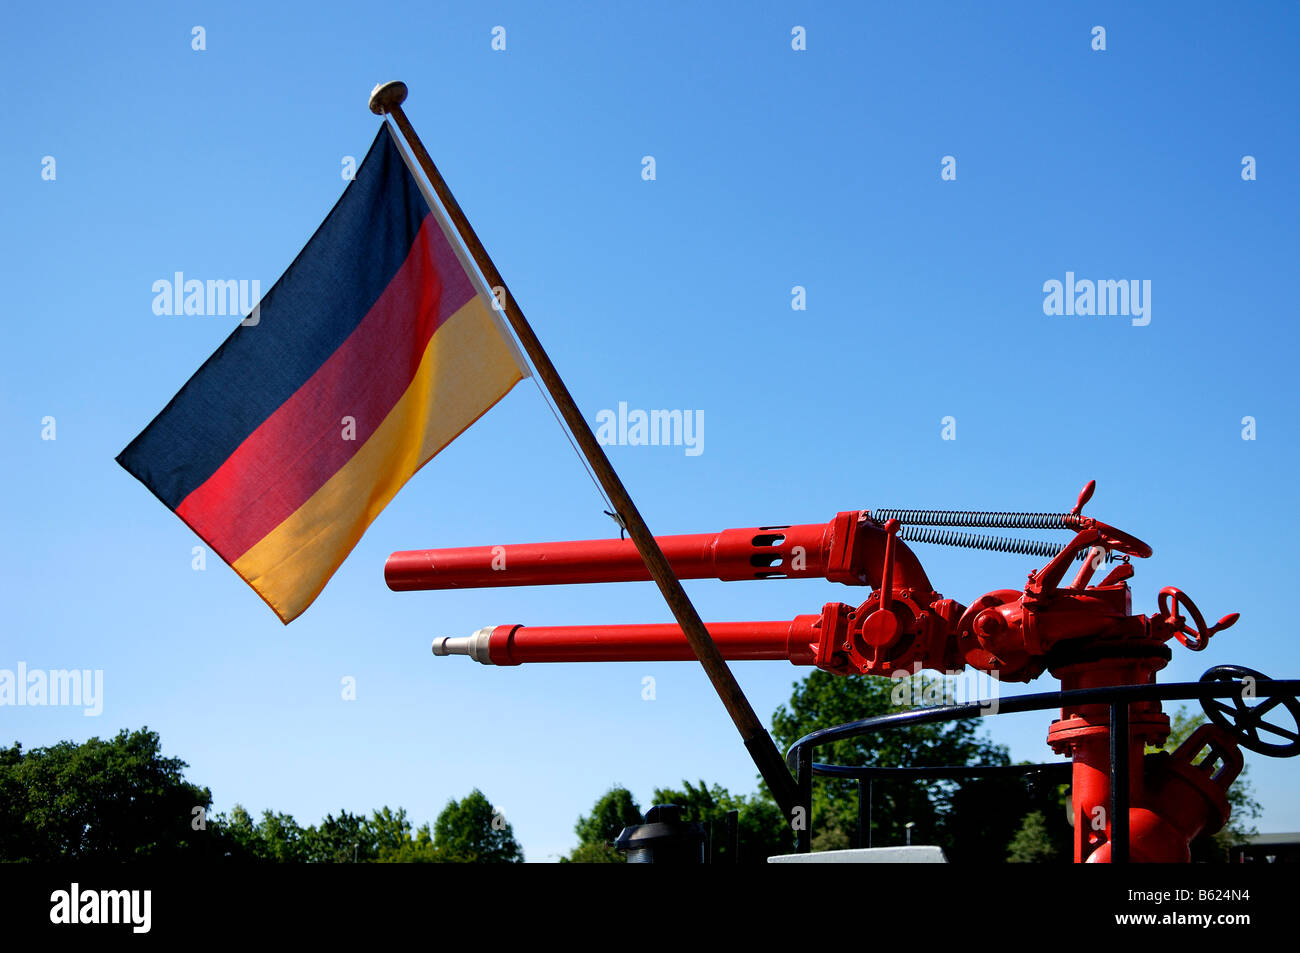 Fire ship monitor with the German flag, Luebeck, Schleswig-Holstein, Germany, Europe Stock Photo